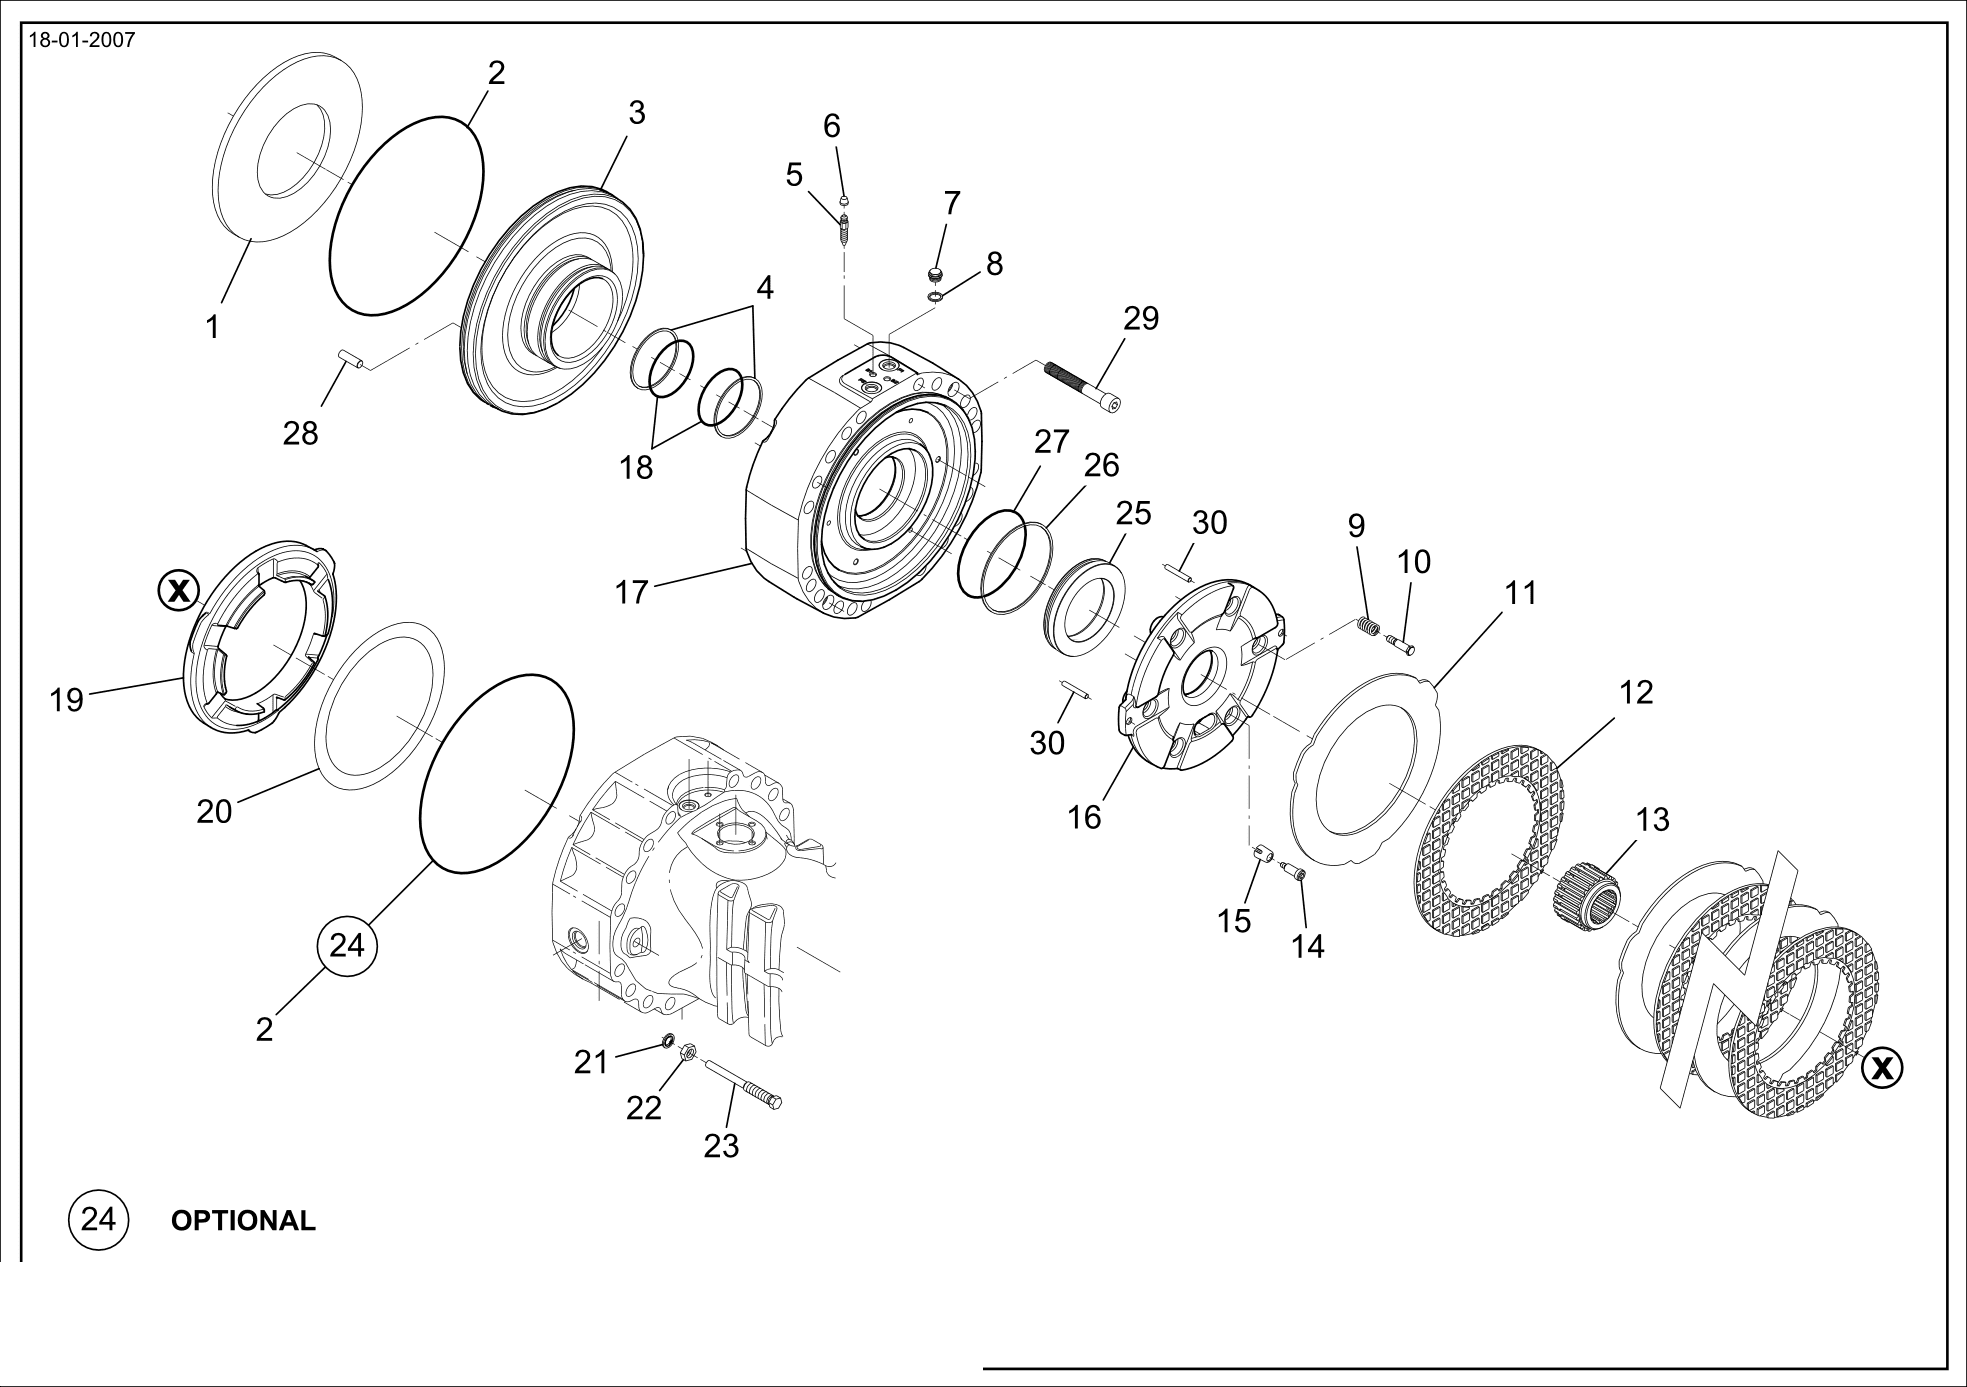 drawing for MERLO 048691 - SEAL (figure 3)